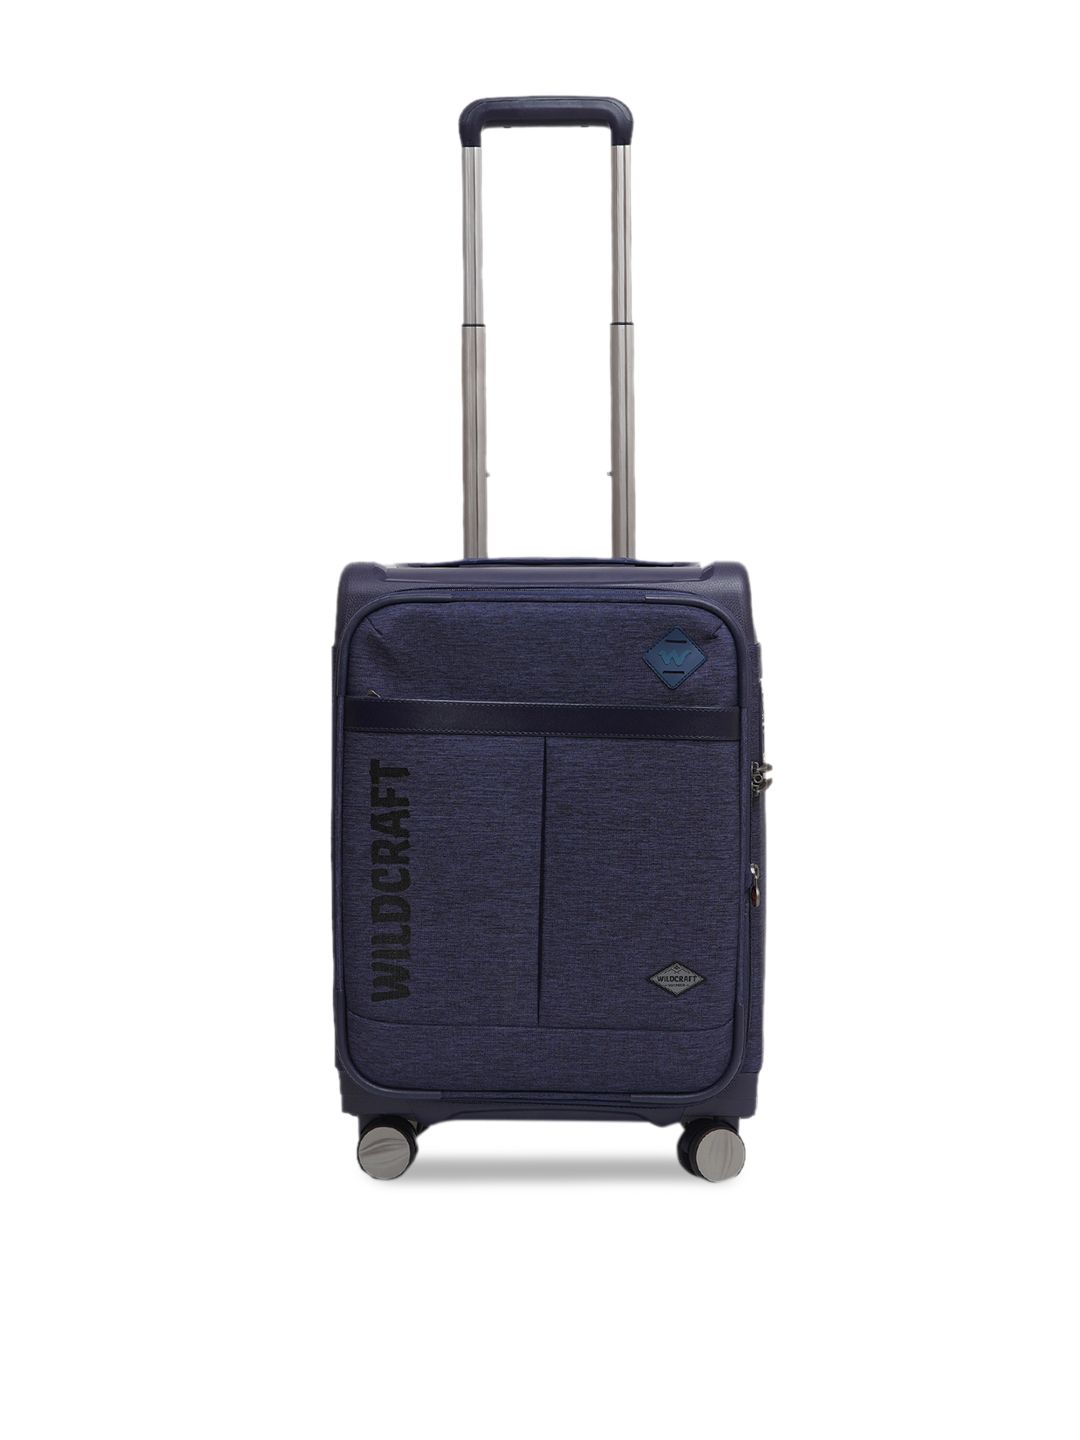 Wildcraft Navy Blue Textured Soft-Side Large Trolley Suitcase Price in India